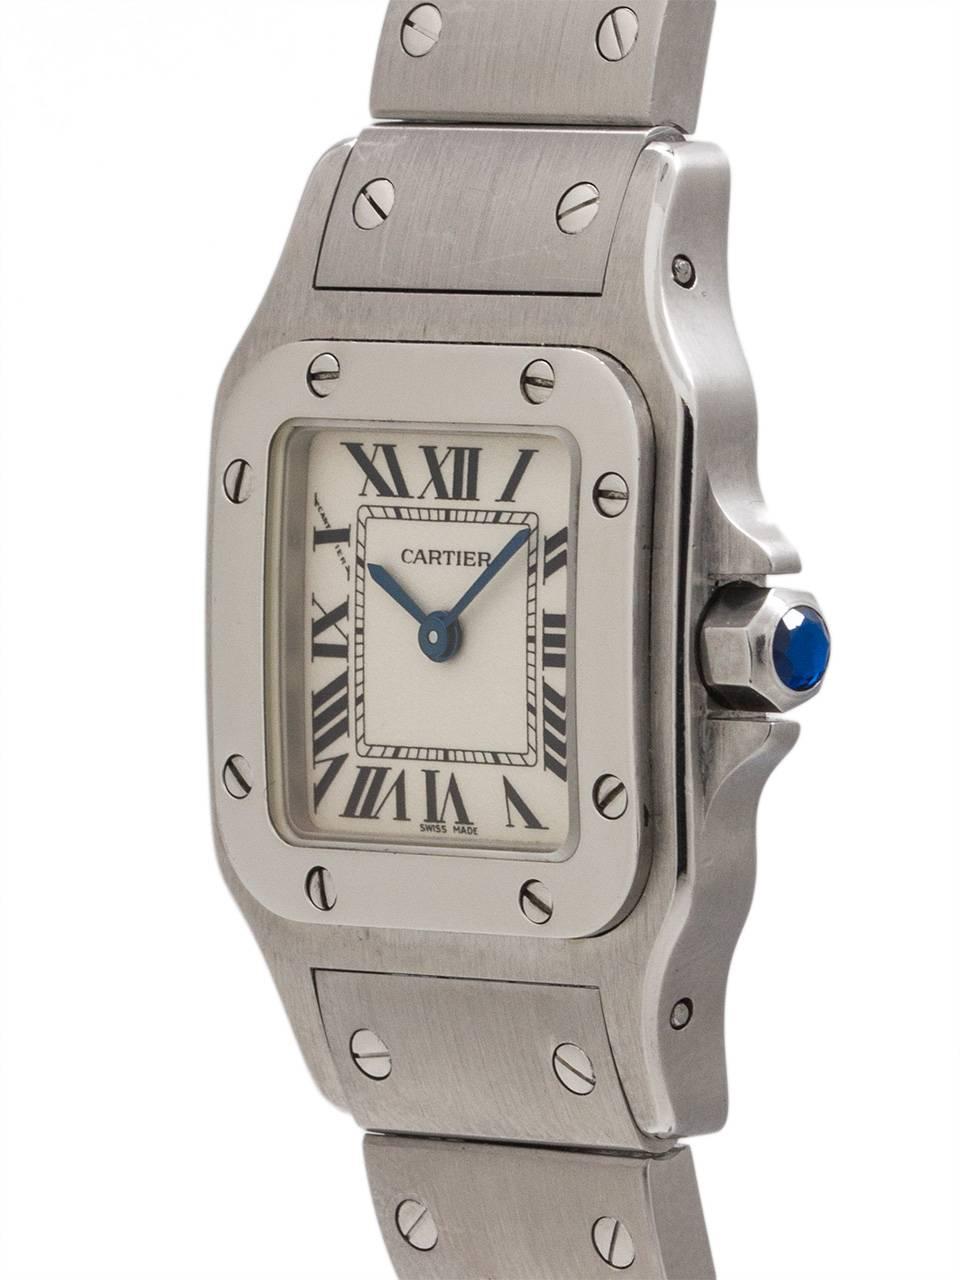 
Lady Cartier Santos Galbe stainless steel with classic white dial with black Roman figures circa 2000’s. Featuring a 24 x 35mm diameter contoured back case with steel bezel secured by 8 screws. Featuring a sapphire crystal, classic white dial and